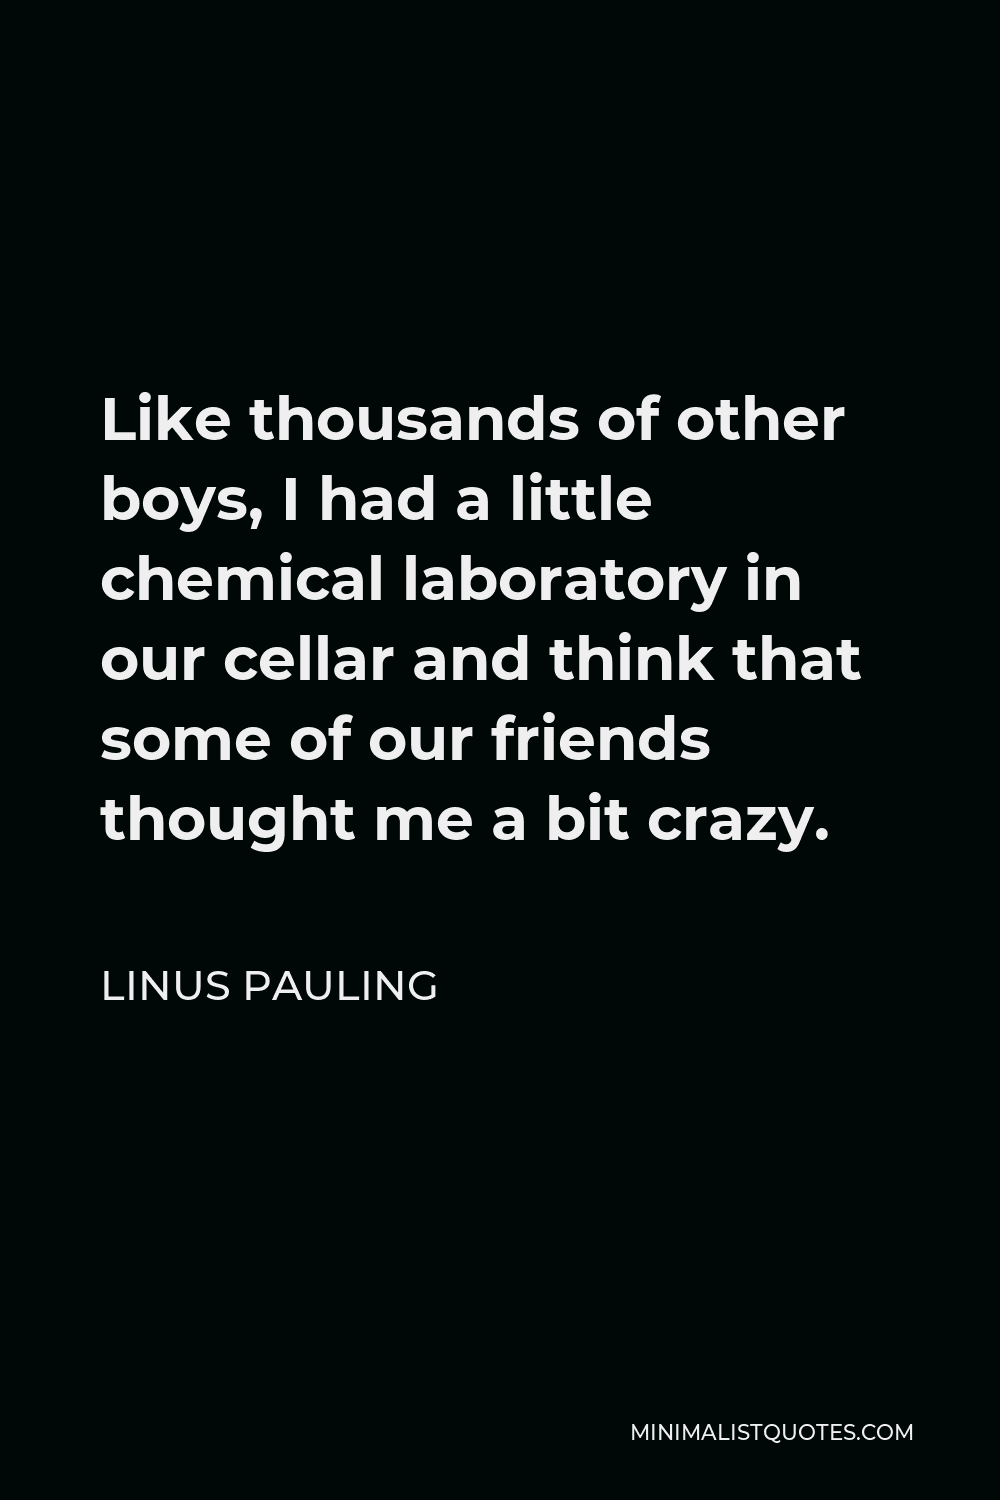 Linus Pauling Quote - Like thousands of other boys, I had a little chemical laboratory in our cellar and think that some of our friends thought me a bit crazy.